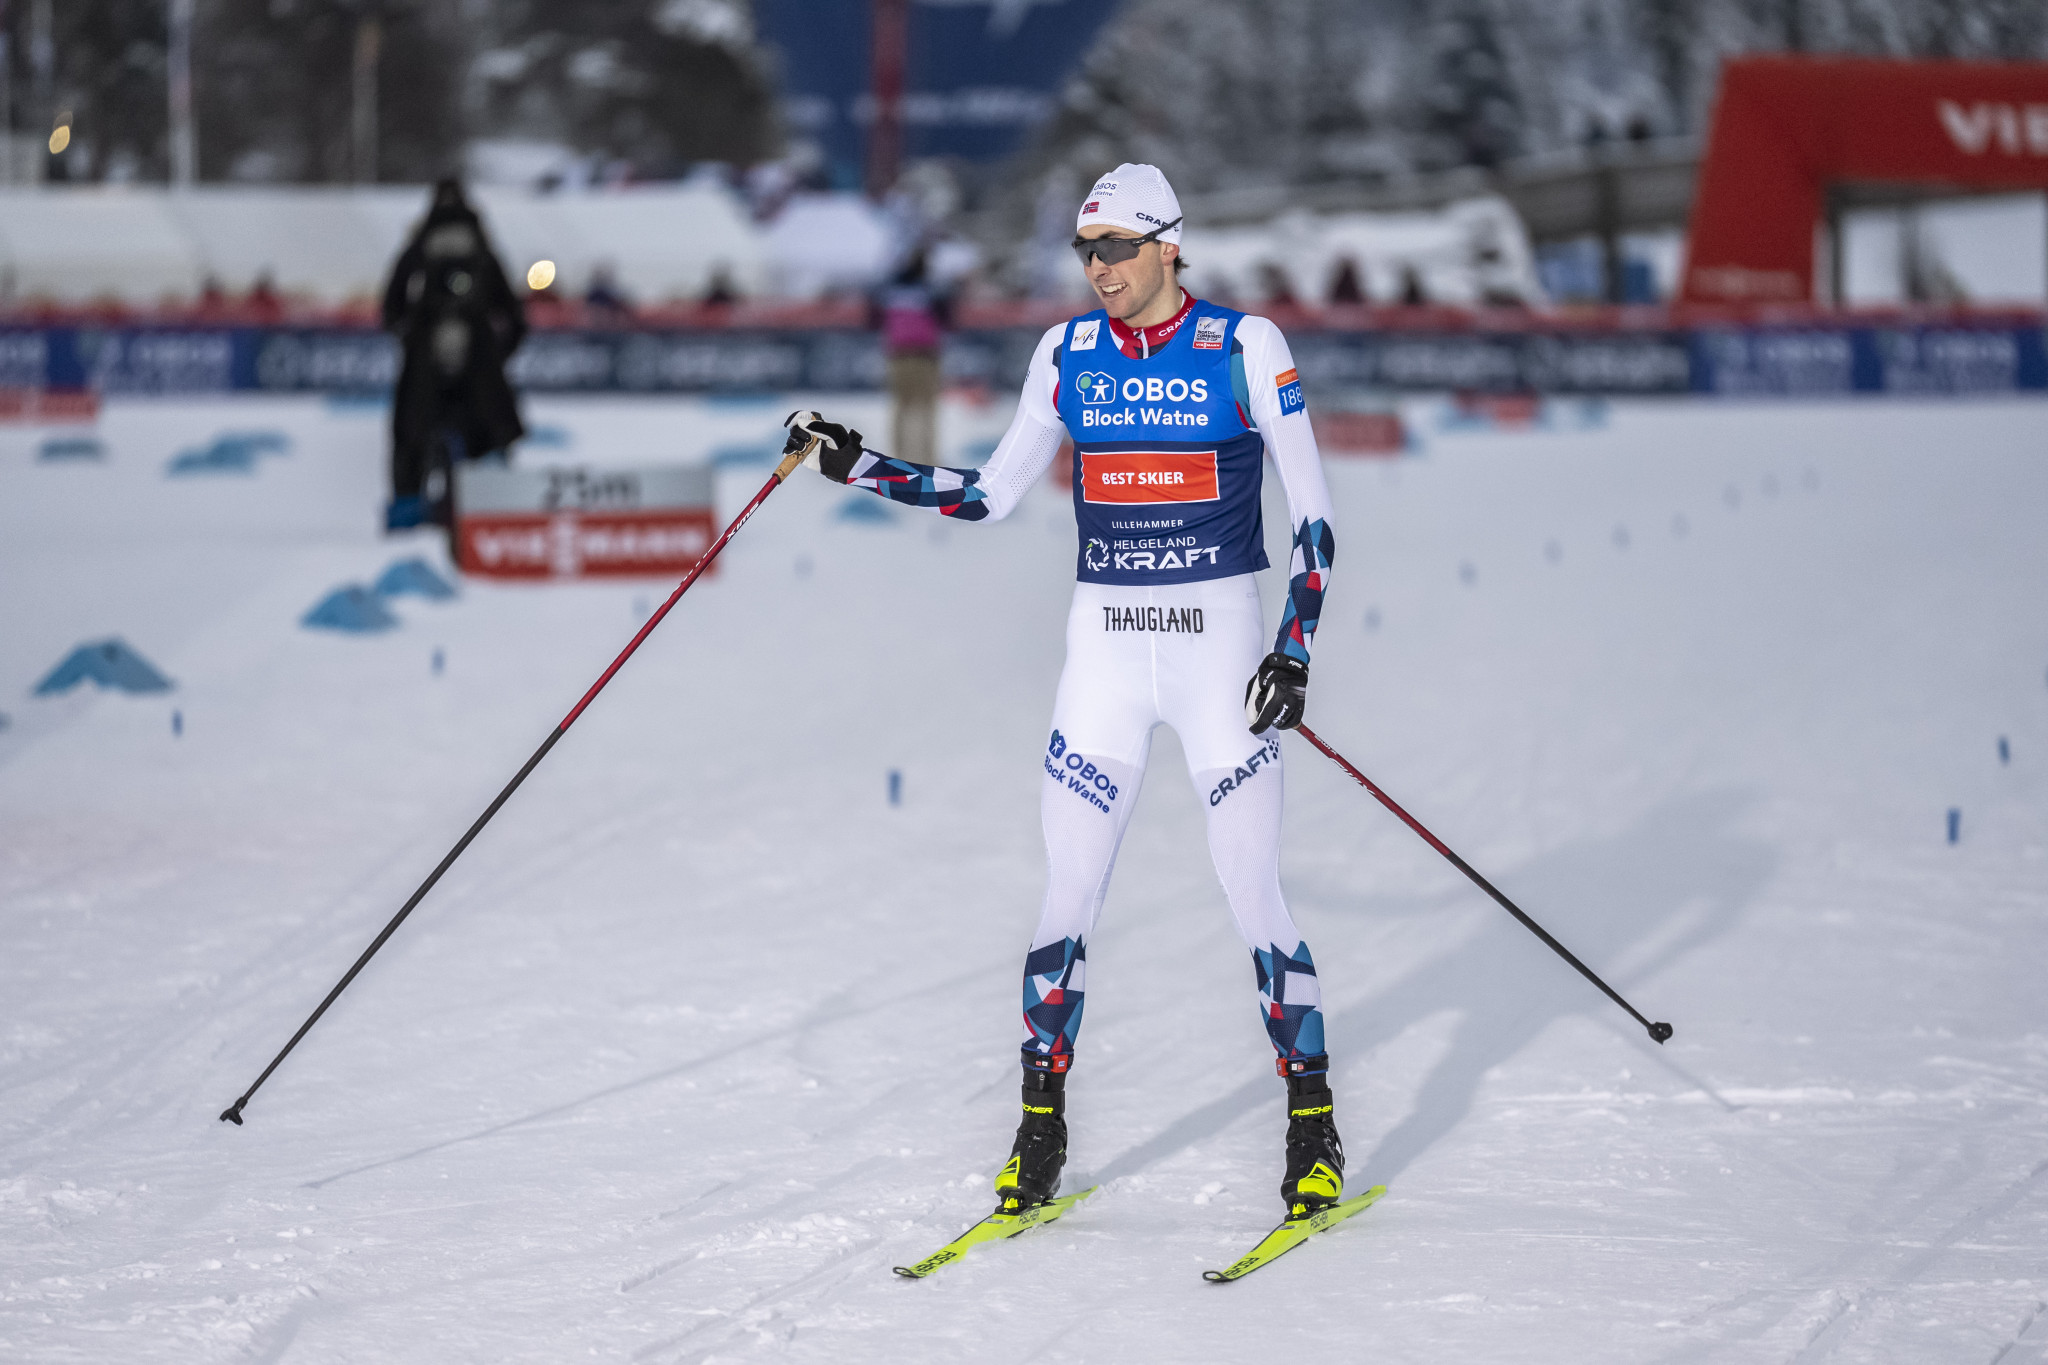 Jarl Magnus Riiber won his 52nd Nordic Combined World Cup event today ©Getty Images